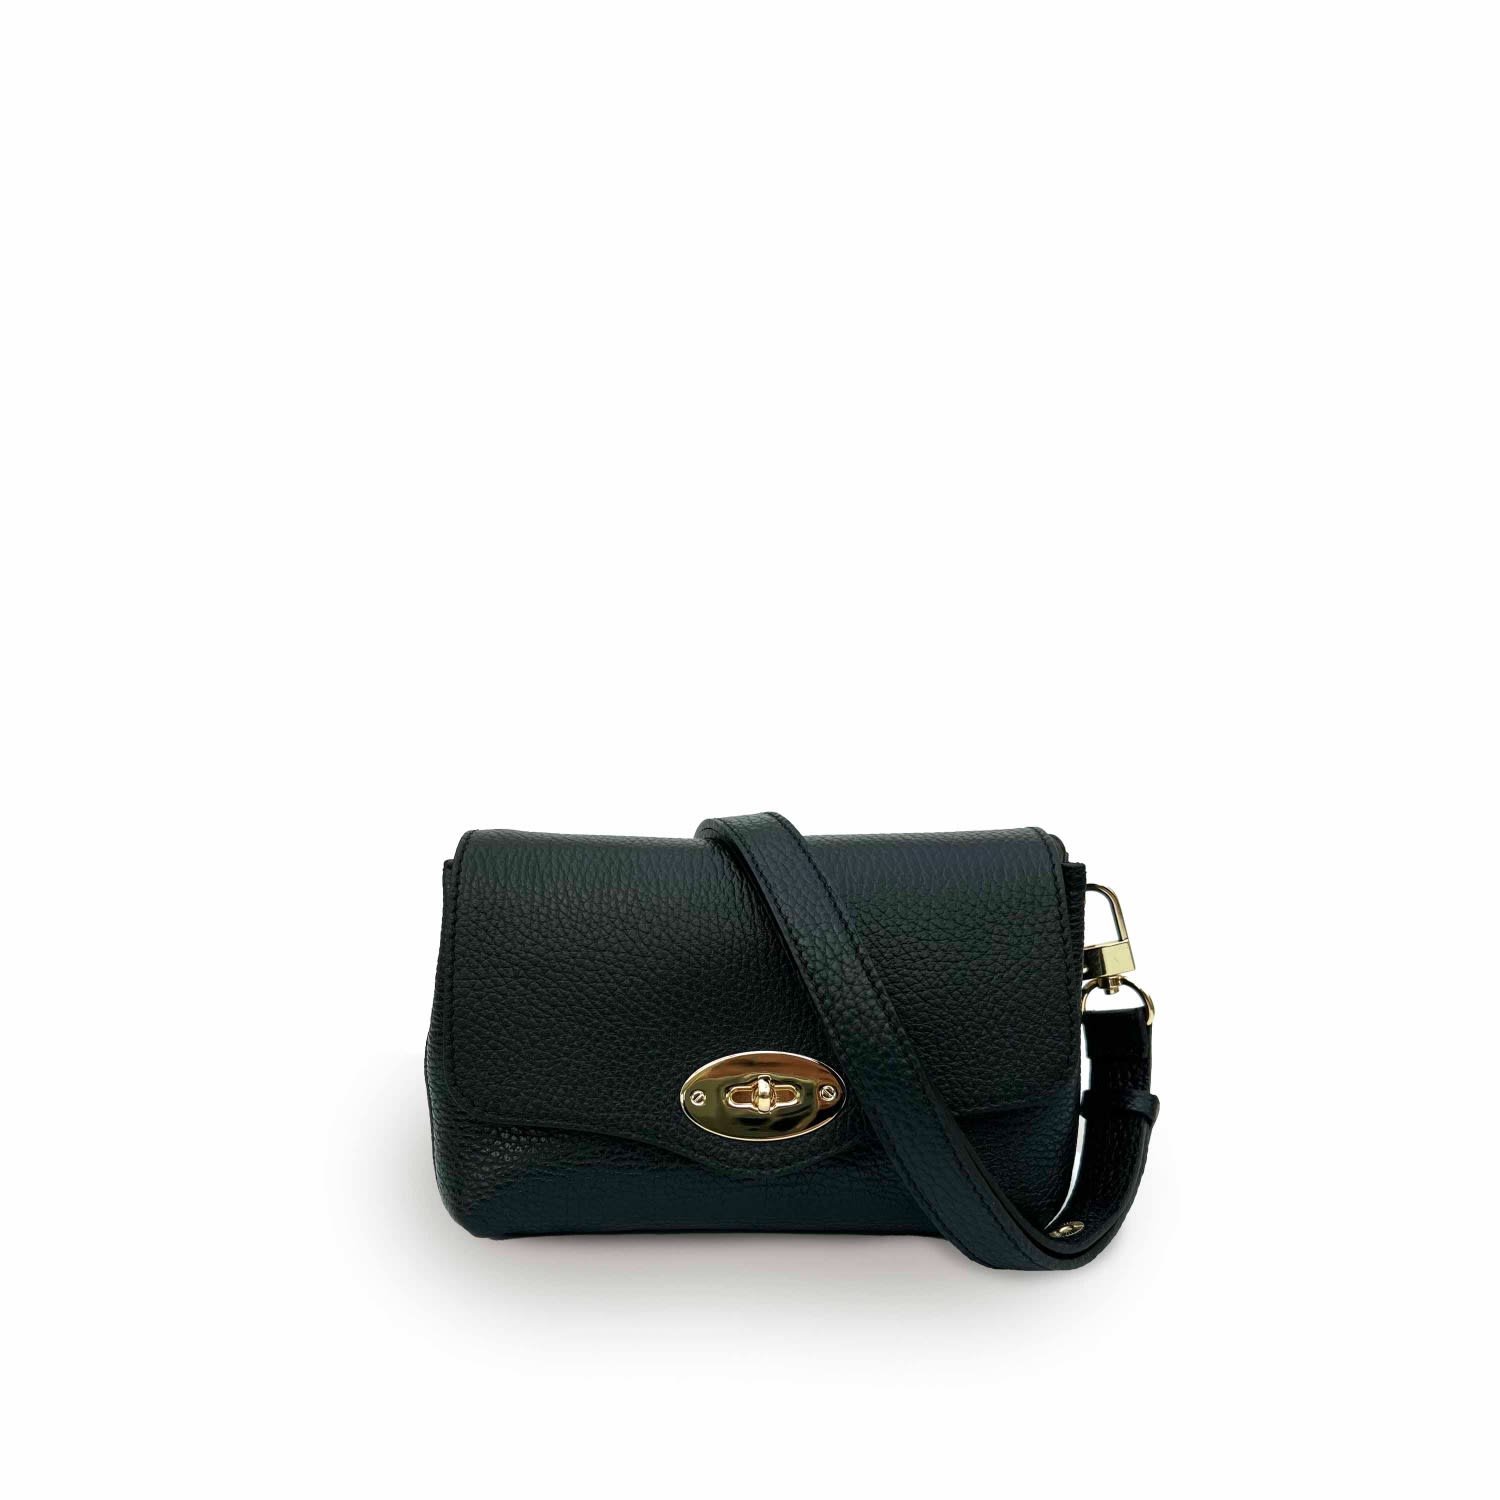 Apatchy London Women's The Maddie Black Leather Bag